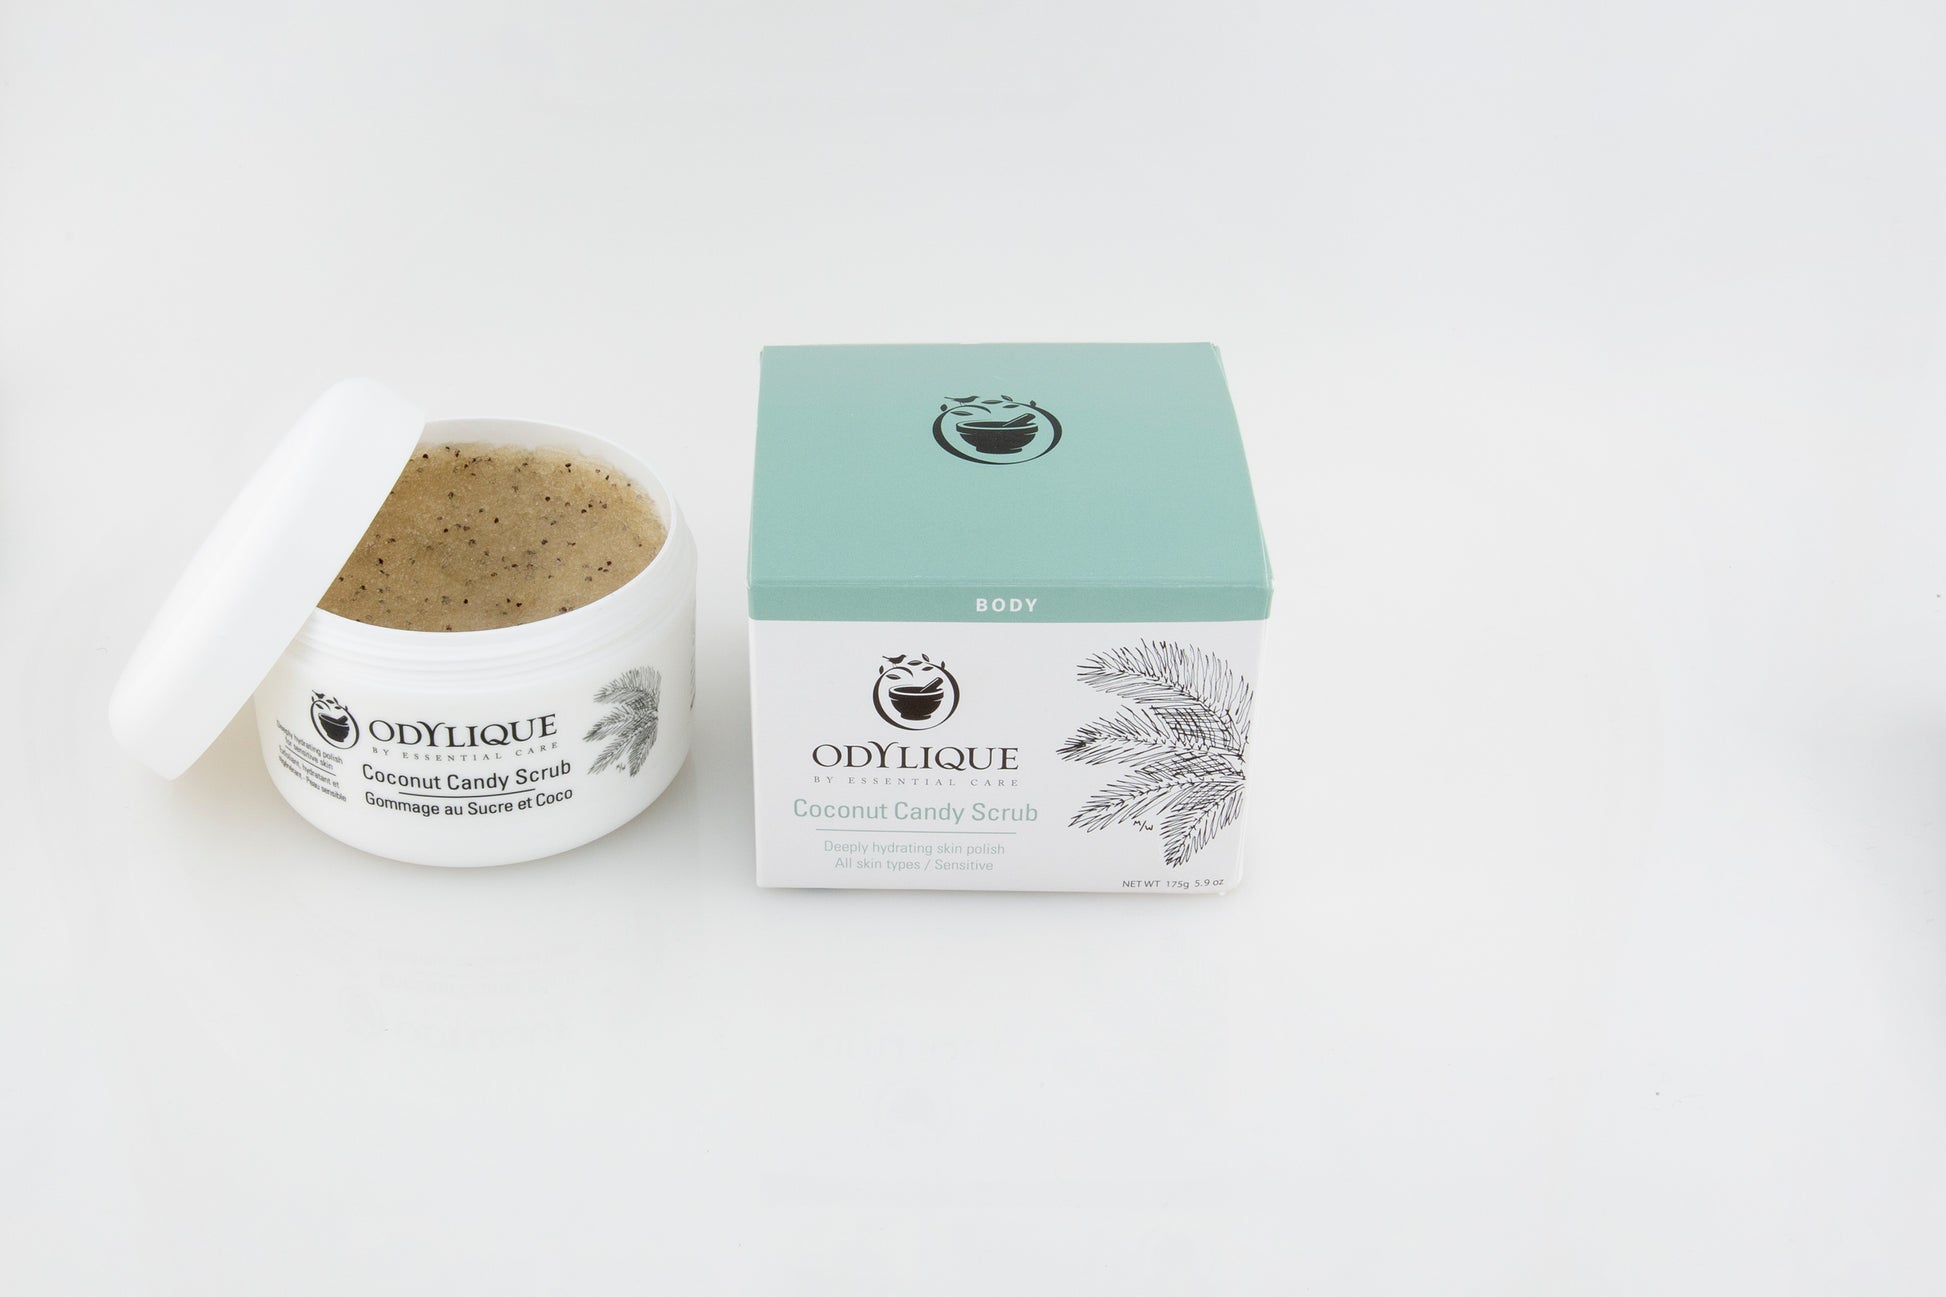 Odylique Coconut Candy Scrub, from above. The jar is open showing the scrub and the box is next to it. Vegan bodycare